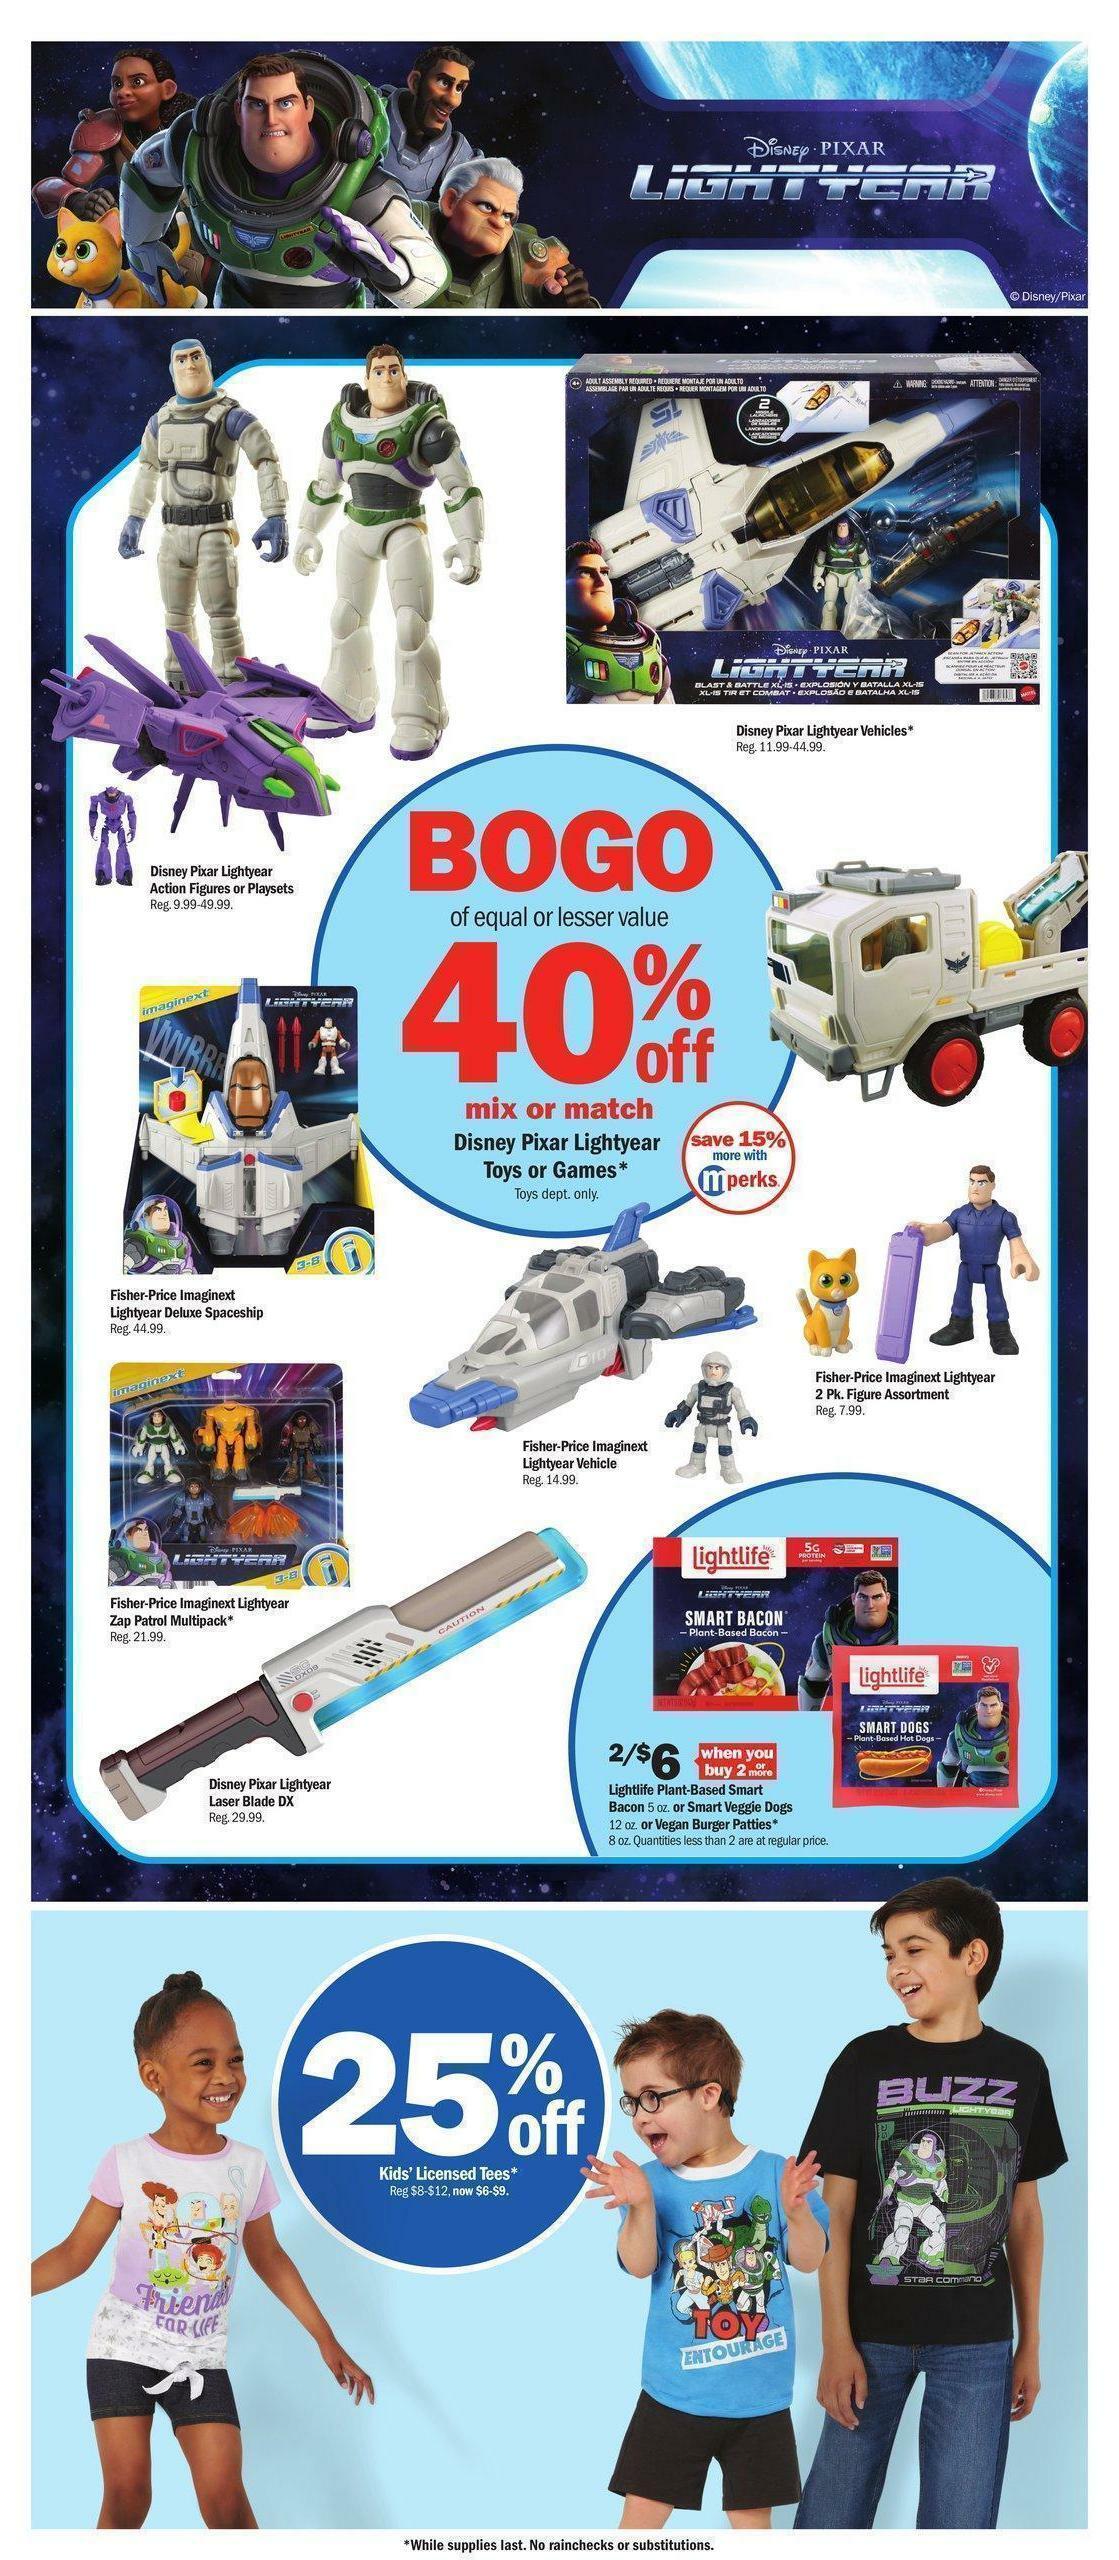 Meijer Weekly Ad from June 12